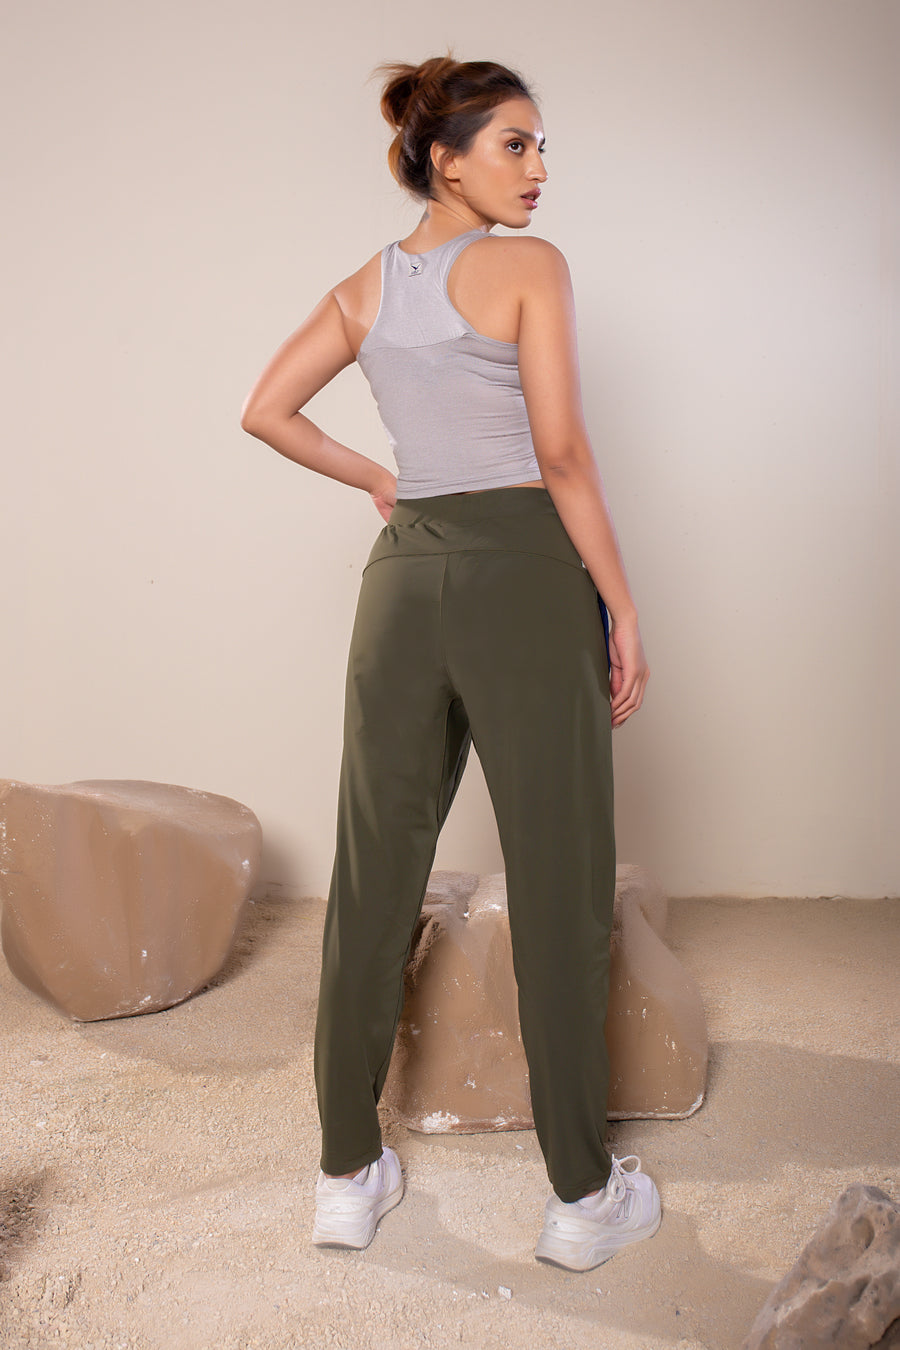 Women's Wanderlust Pant Olive | VOLO Apparel | These pants are designed to give you wanderlust, an ultralight super durable athletic pant with a five pocket design, a 3 point gusset for all your movements and a high ankle tapered bottom. The revolutional Italian nylon is patented with UPF 50 protection and extreme breathability. The one pant to go everywhere and do everything!